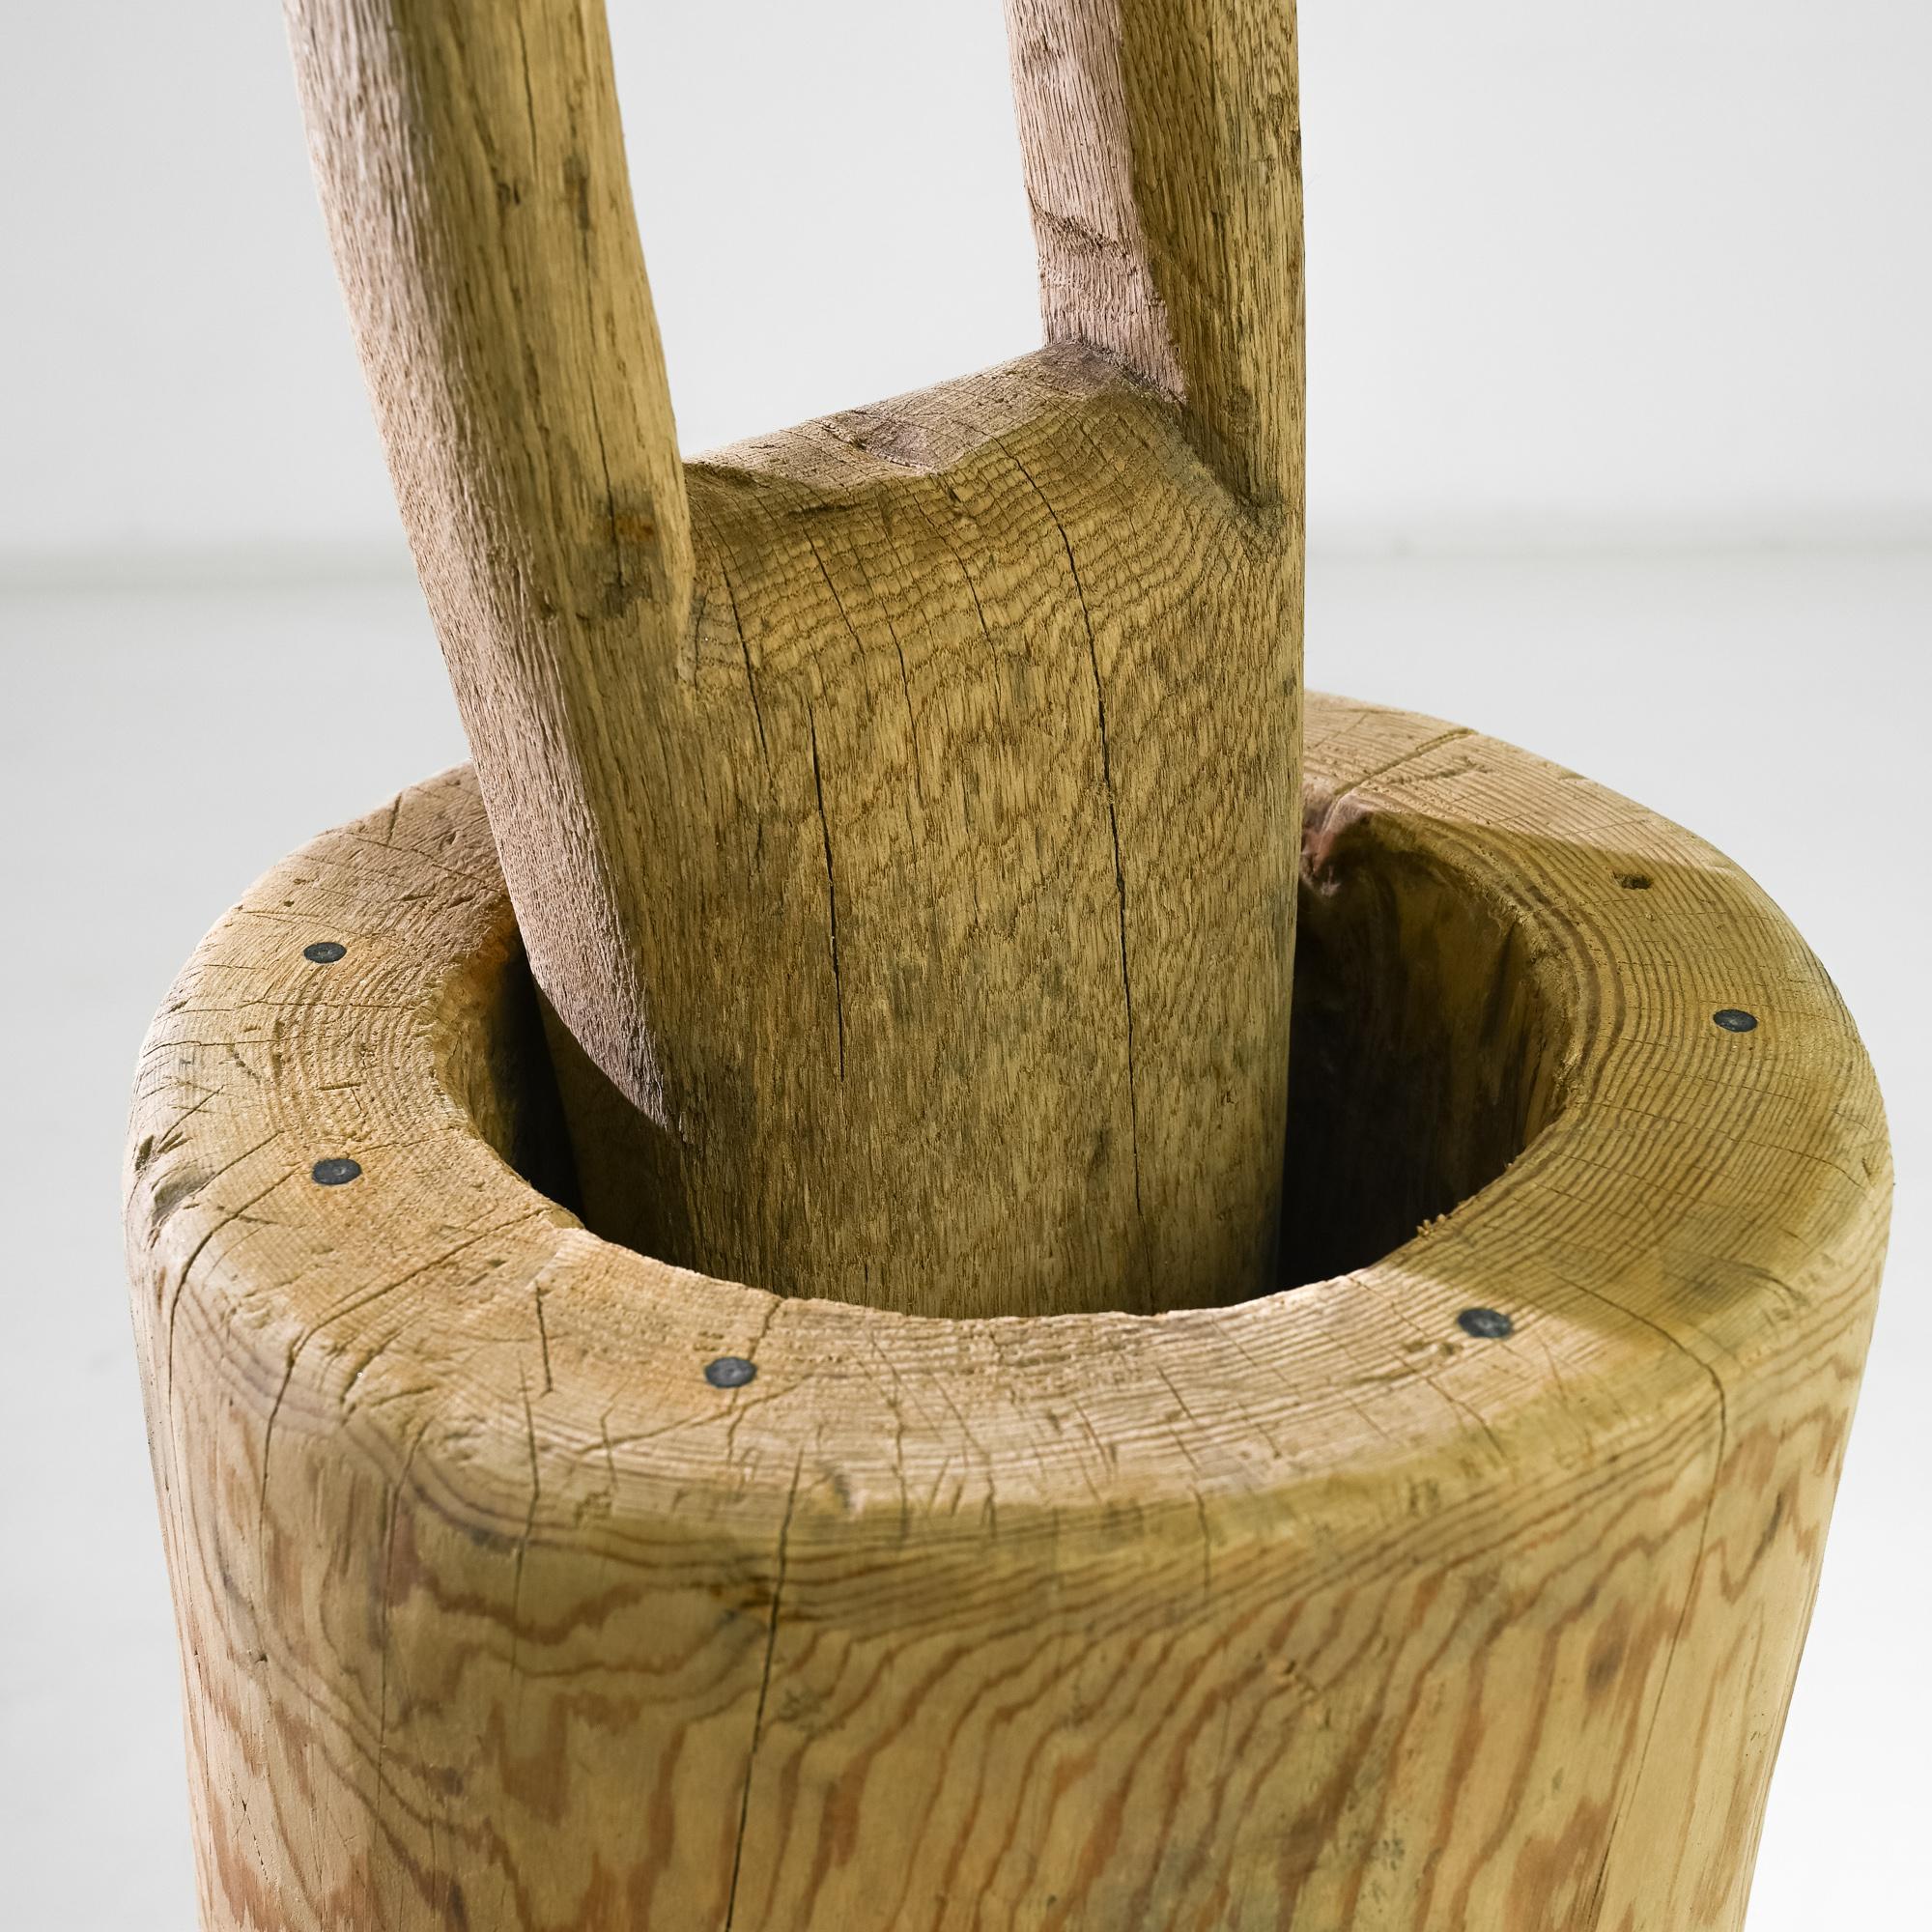 19th Century Central European Wooden Mortar and Pestle 4